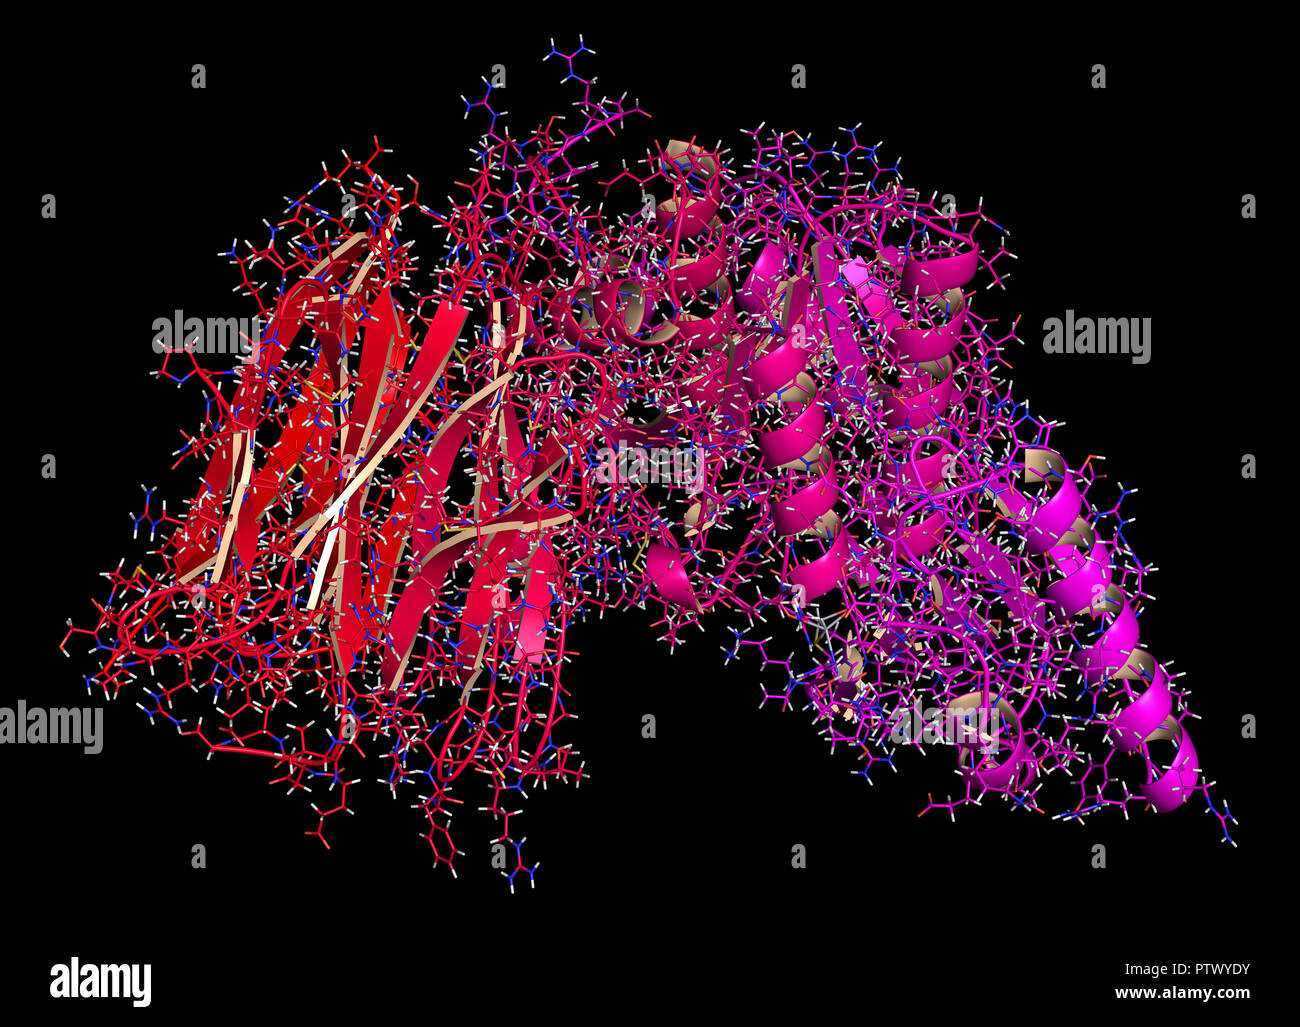 Proprotein convertase subtilisin kexin type 9 (PCSK9) protein. Target of multiple investigational cholesterol lowering drugs. 3D rendering, cartoon +  Stock Photo